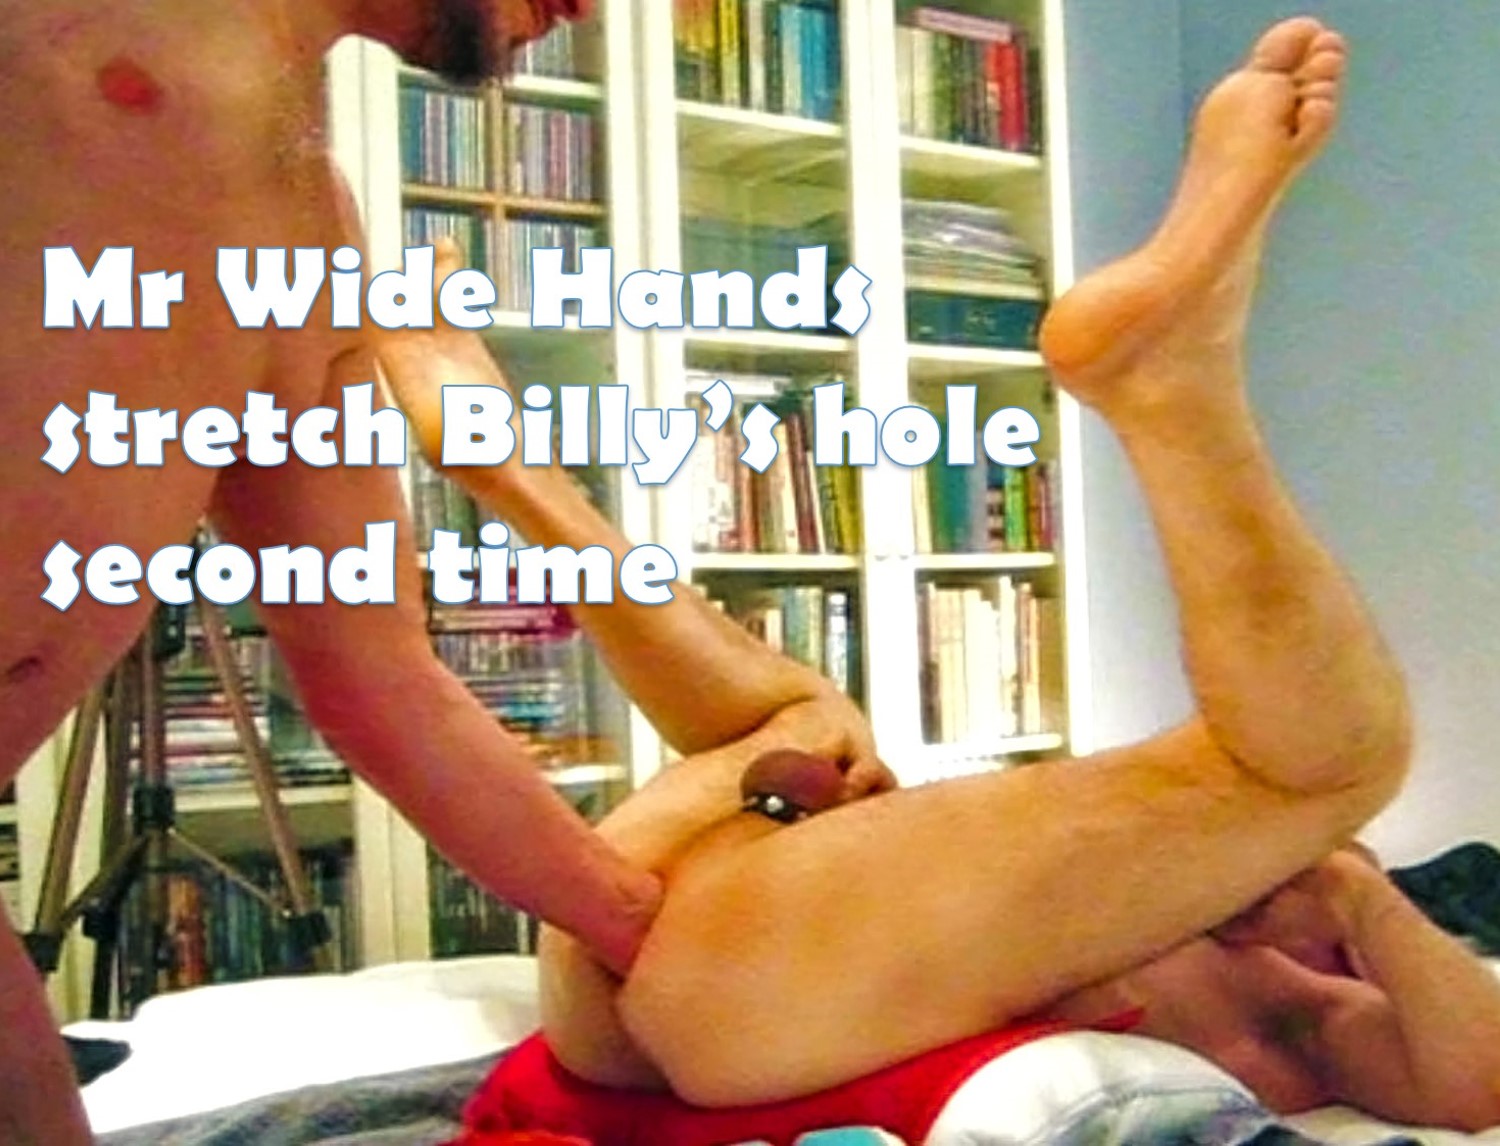 60. Mr Wide Hands in Billy's hole second time